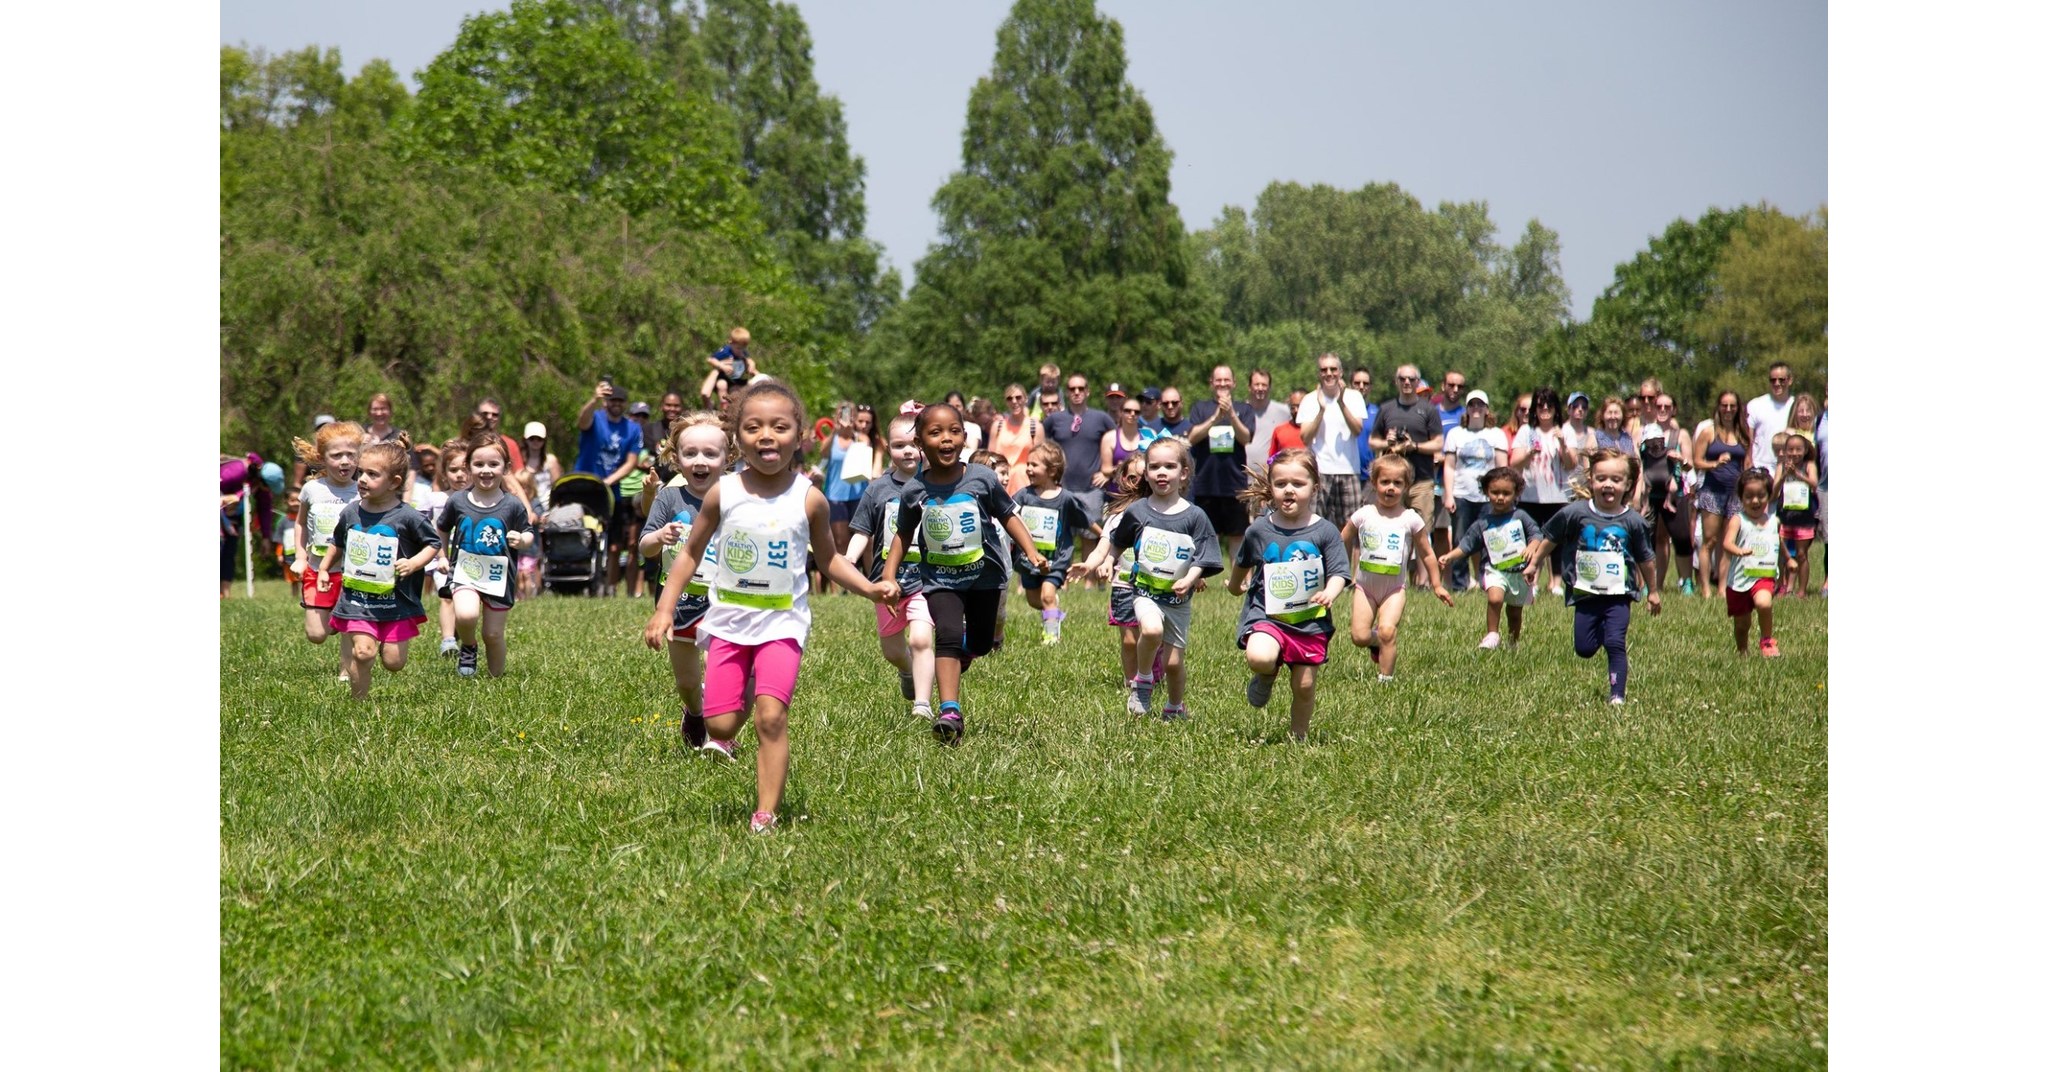 MUSSELMAN’S PARTNERS WITH HEALTHY KIDS RUNNING SERIES TO EMPOWER CHILDREN TO LIVE A HEALTHY LIFESTYLE